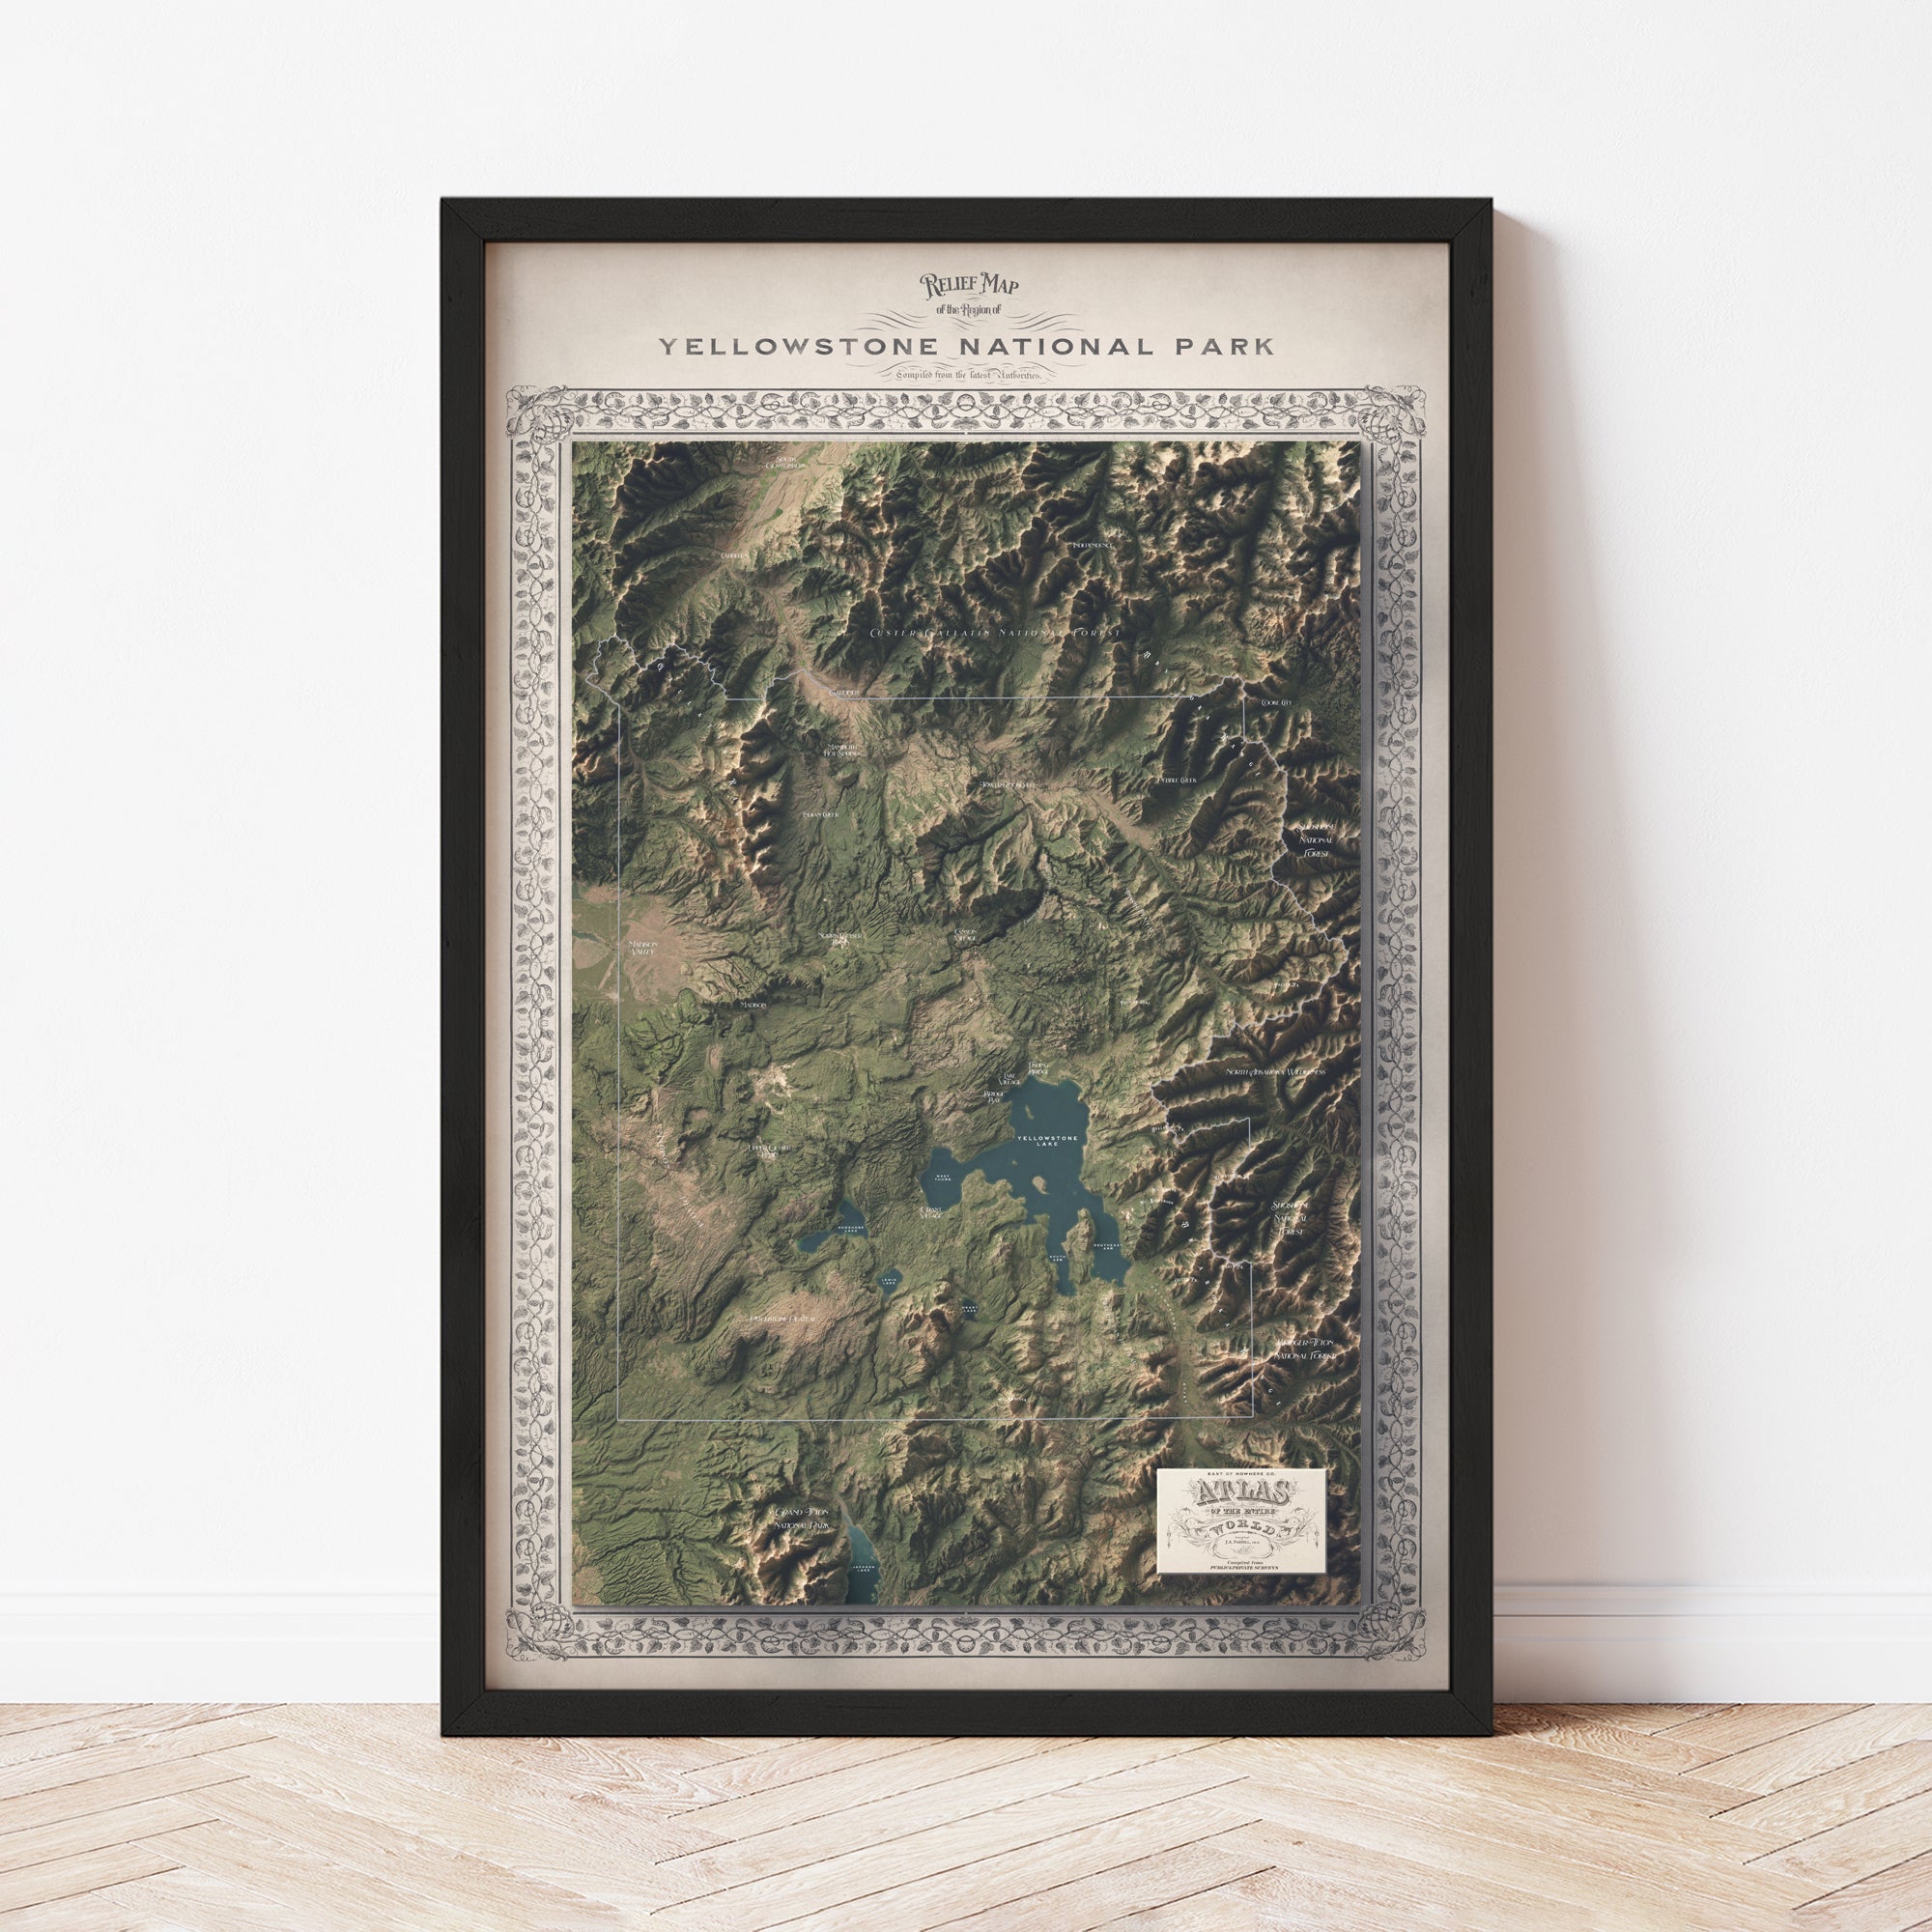 Yellowstone National Park Map - The East of Nowhere World Atlas